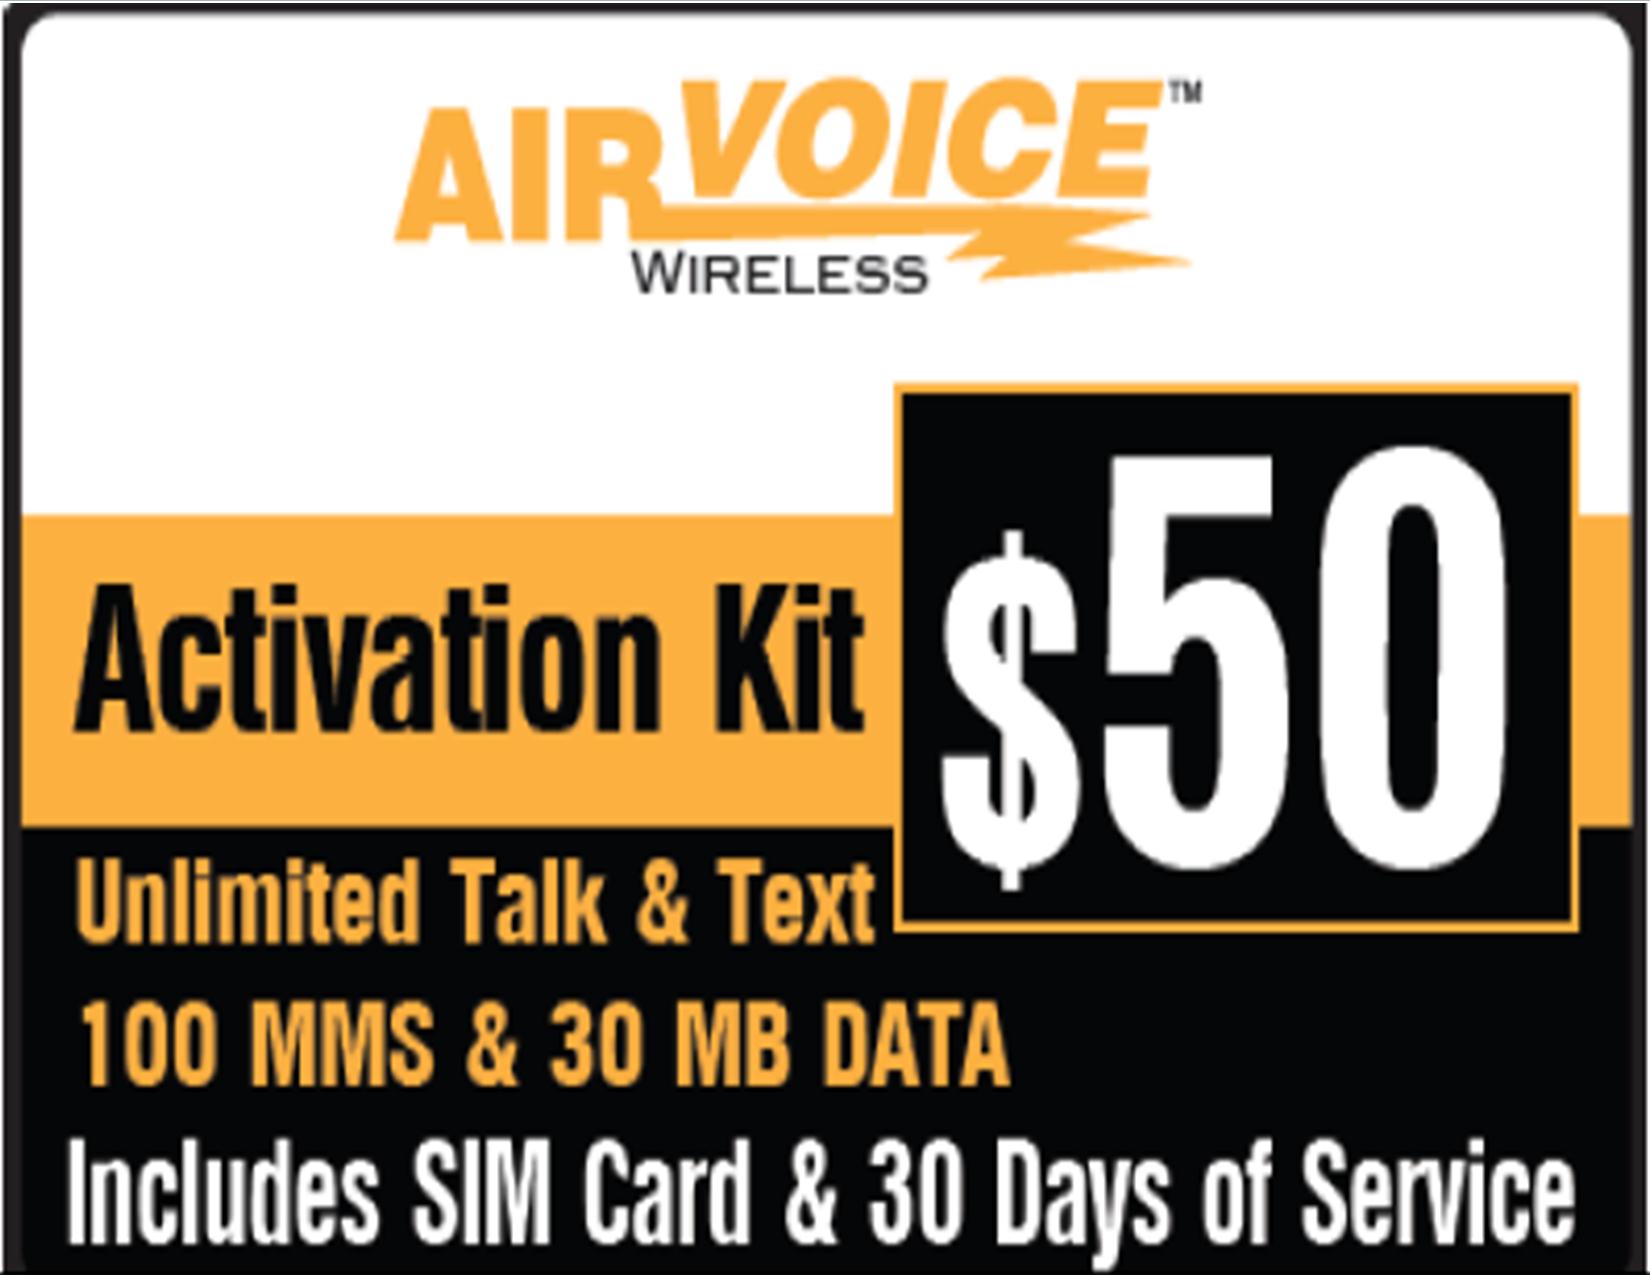 How do you activate Airvoice Wireless?